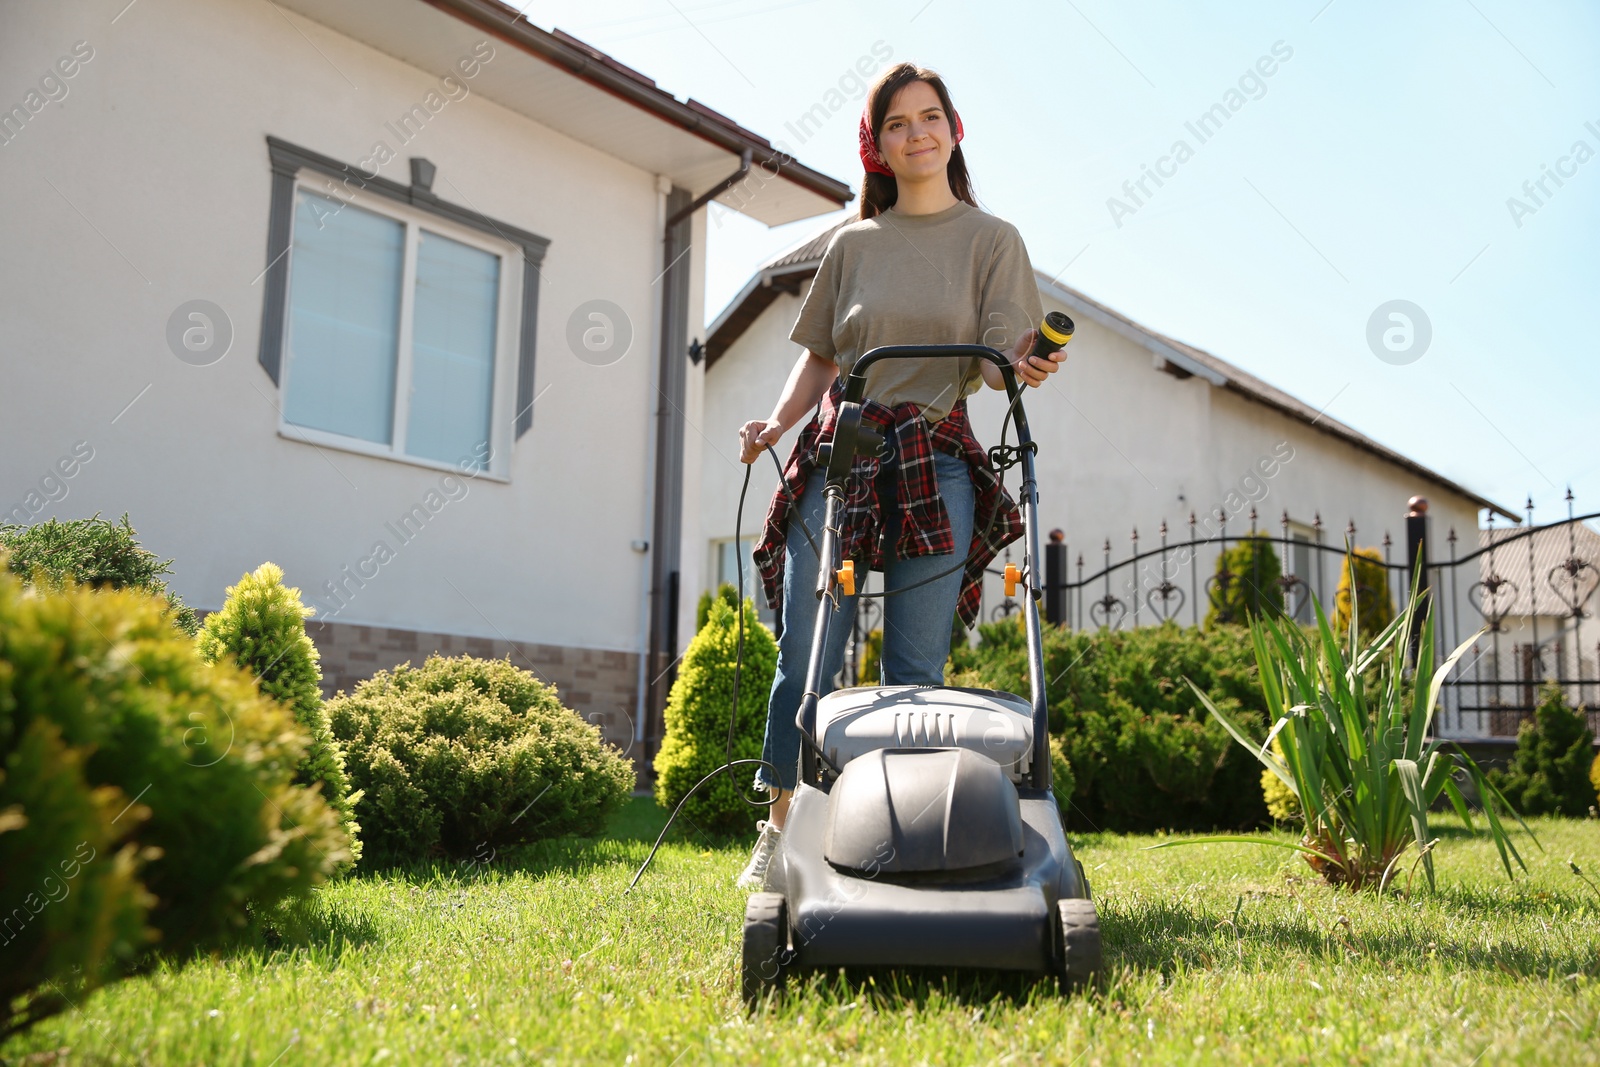 Photo of Smiling woman with modern lawn mower in garden, low angle view